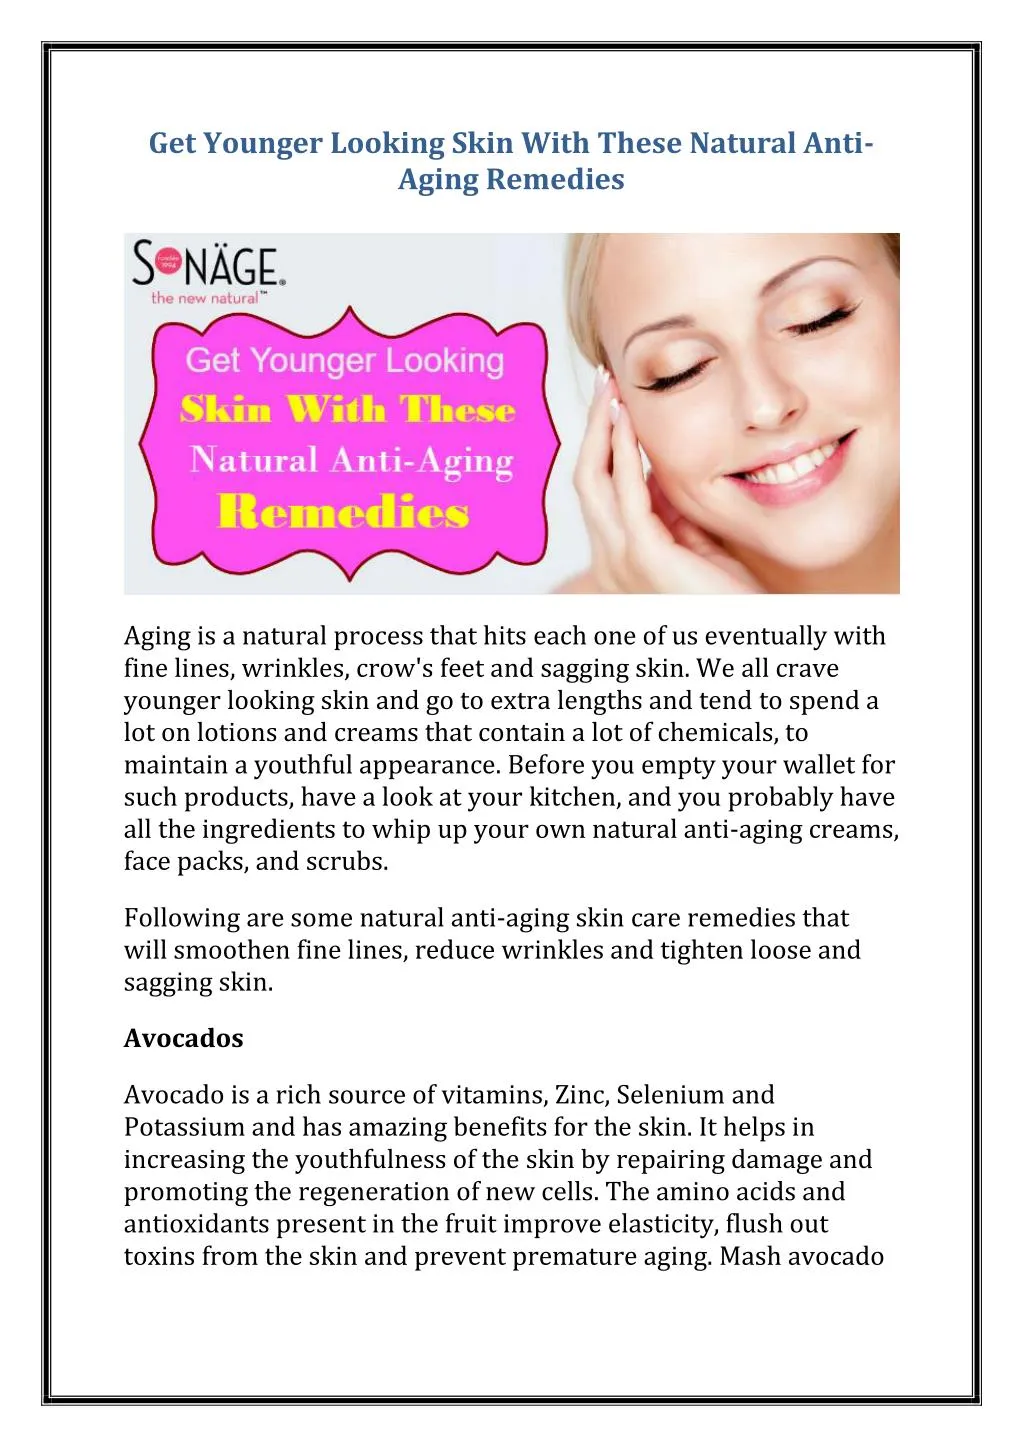 get younger looking skin with these natural anti